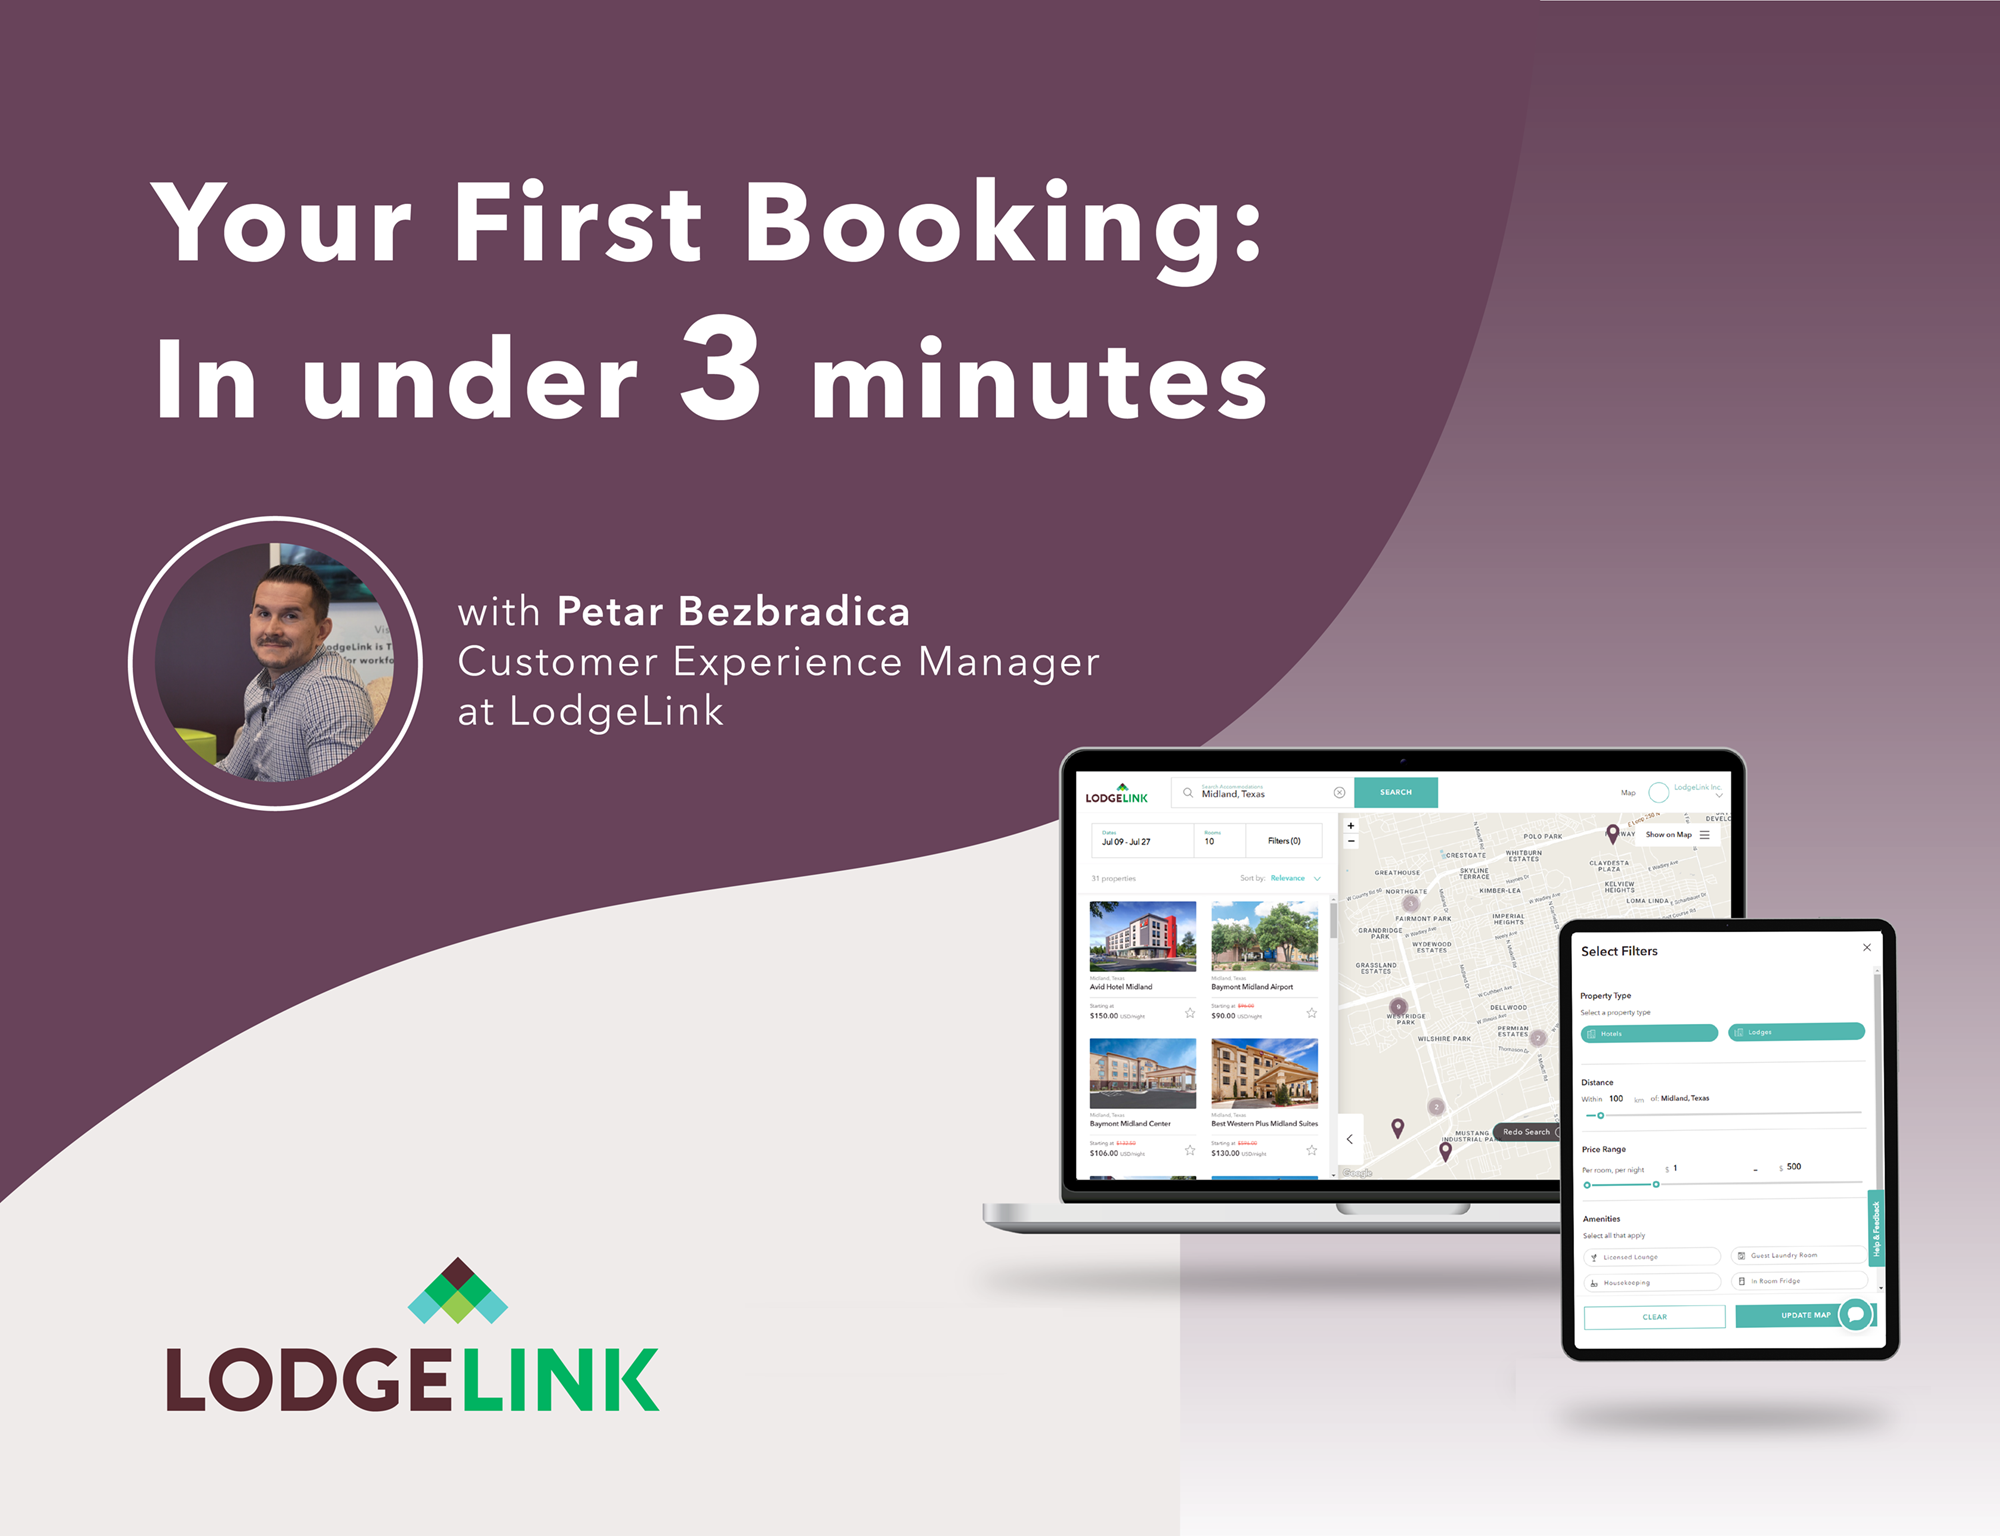 How to Make Your First Booking with LodgeLink in Under Three Minutes